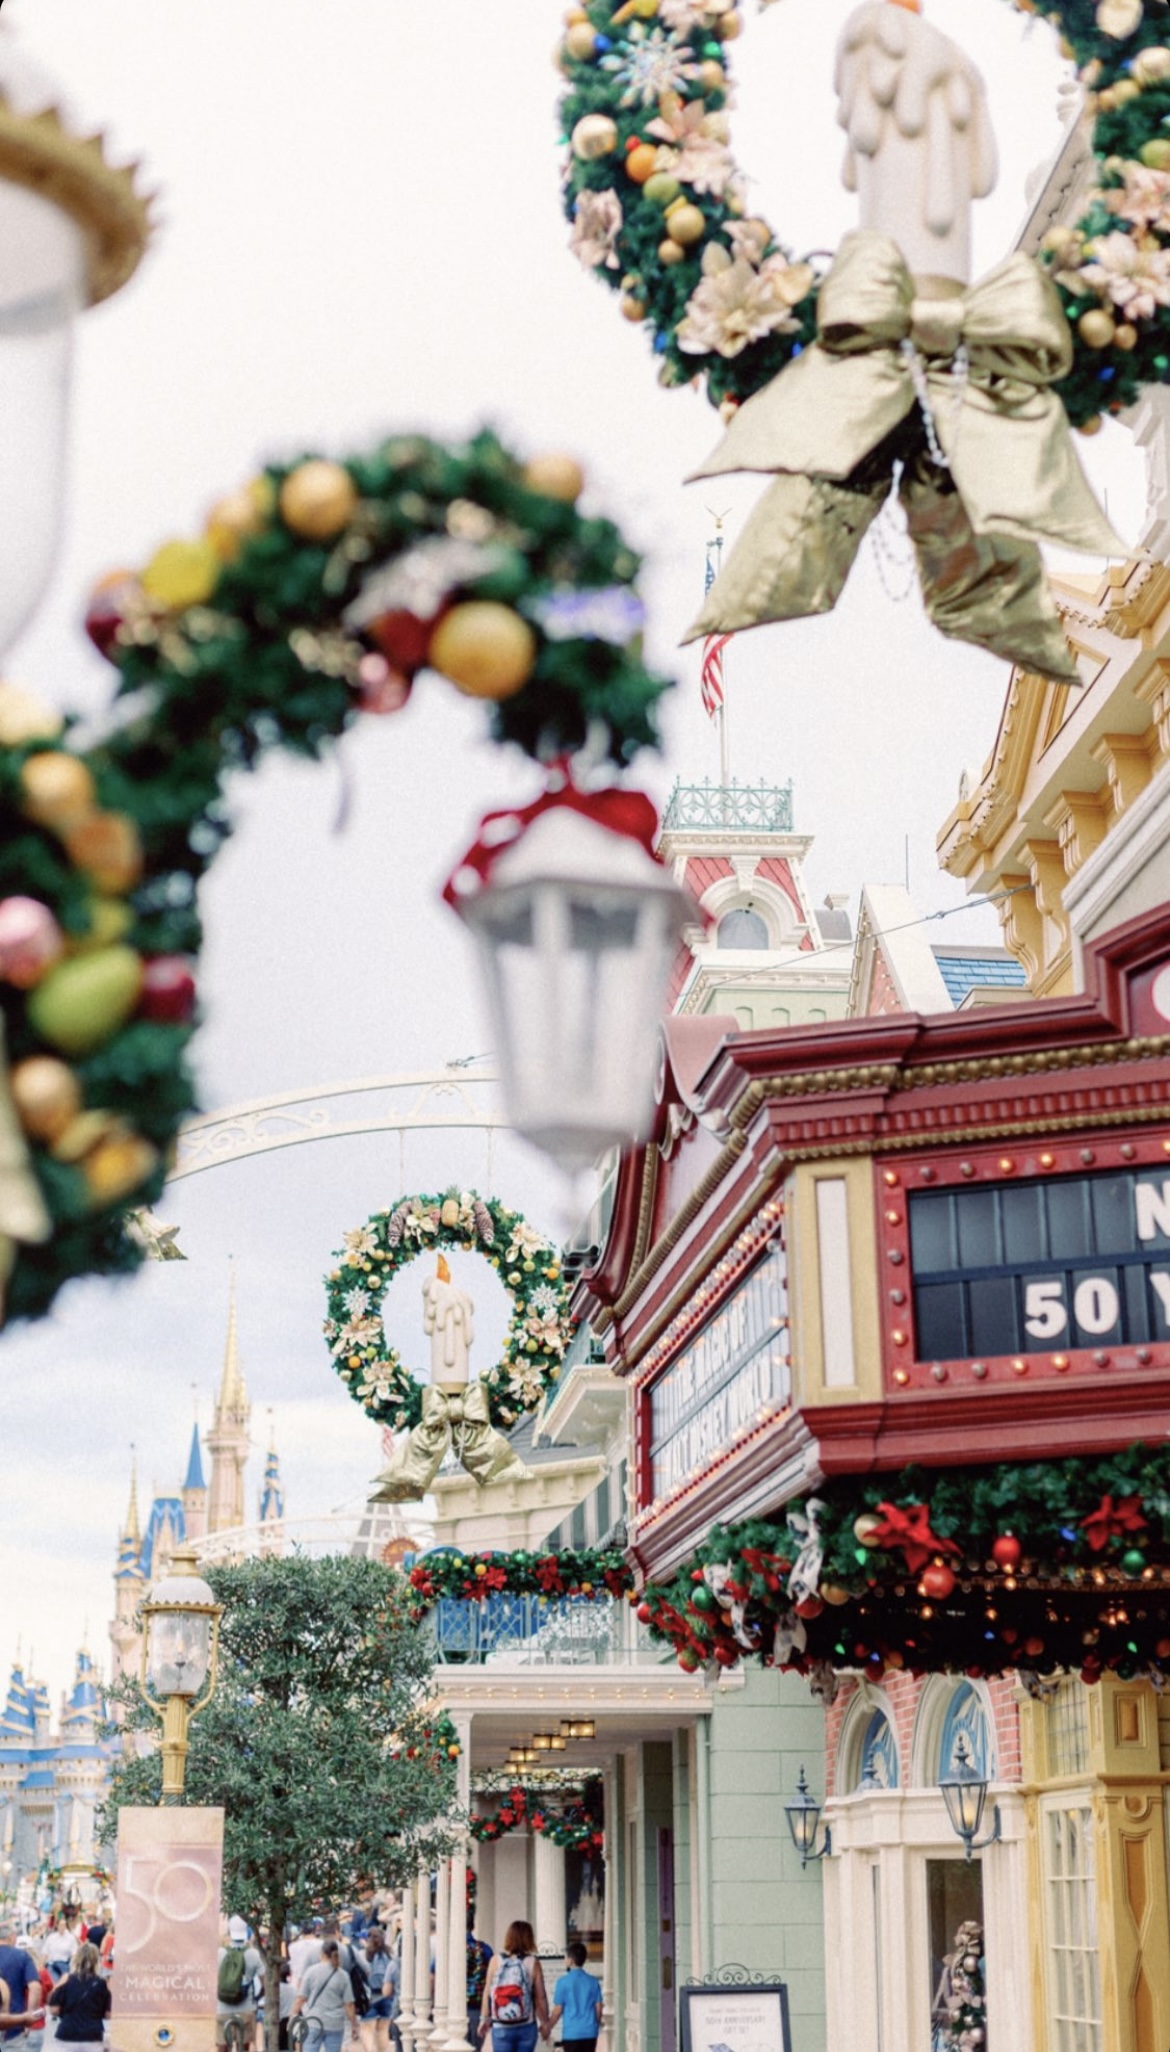 Tips for Mickey's Very Merry Christmas Party